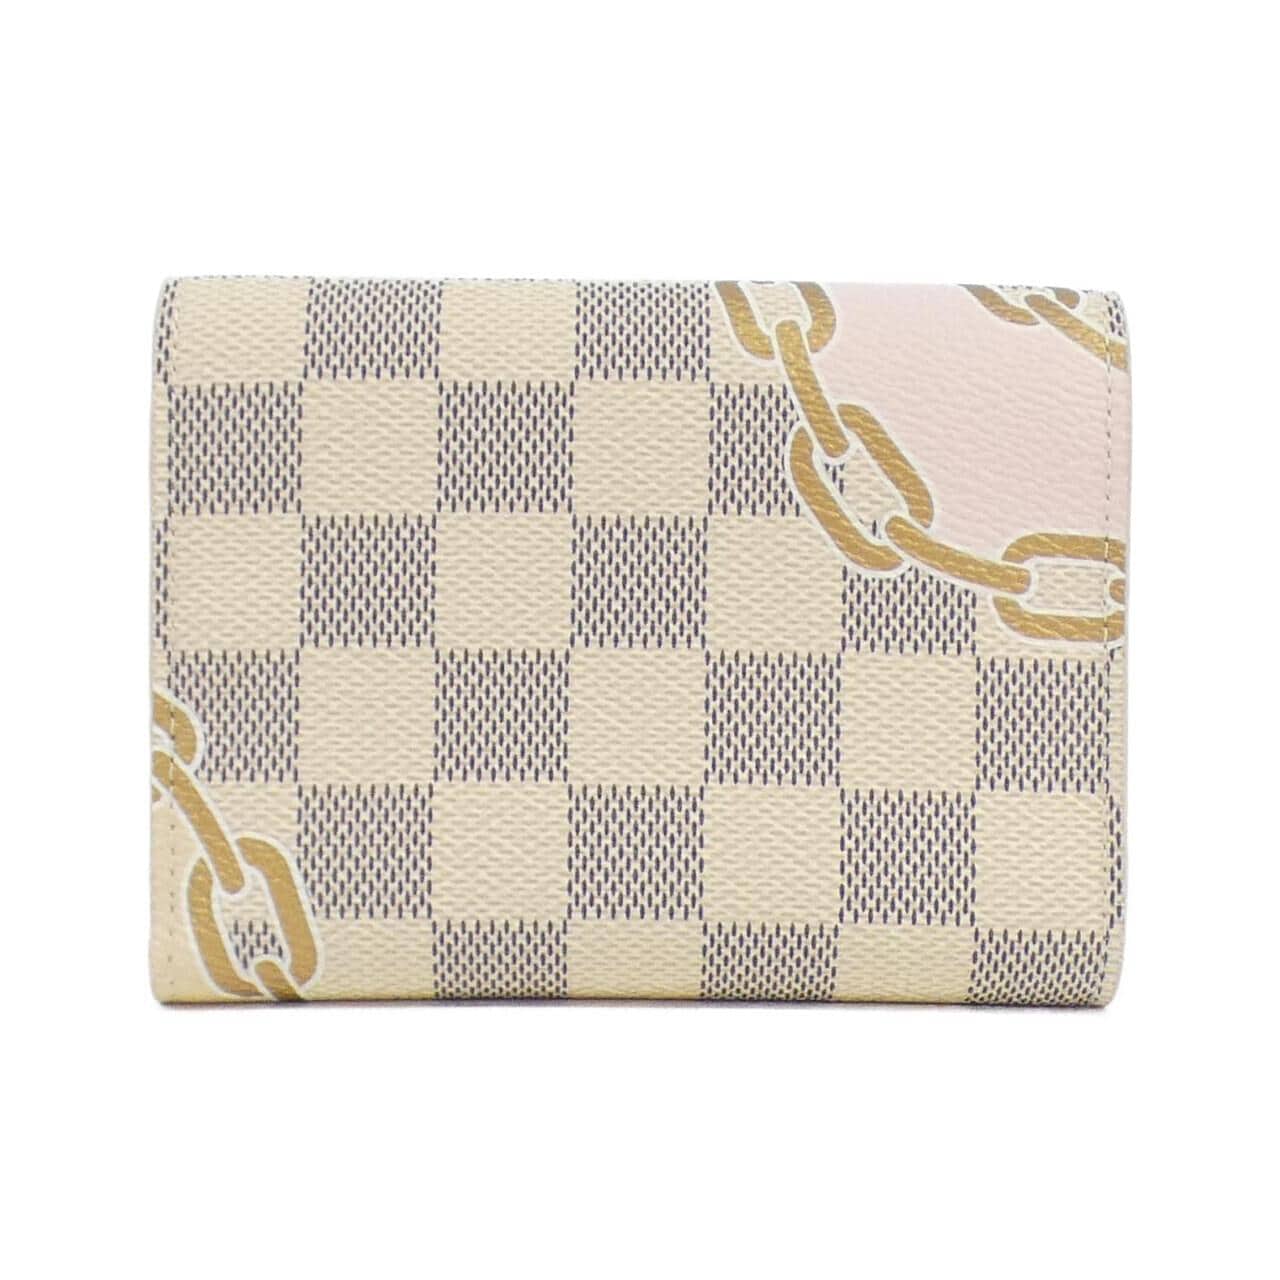 LOUIS VUITTON Damier Azur (Rope and Chain) Portefeuille Victorine N40468 Wallet